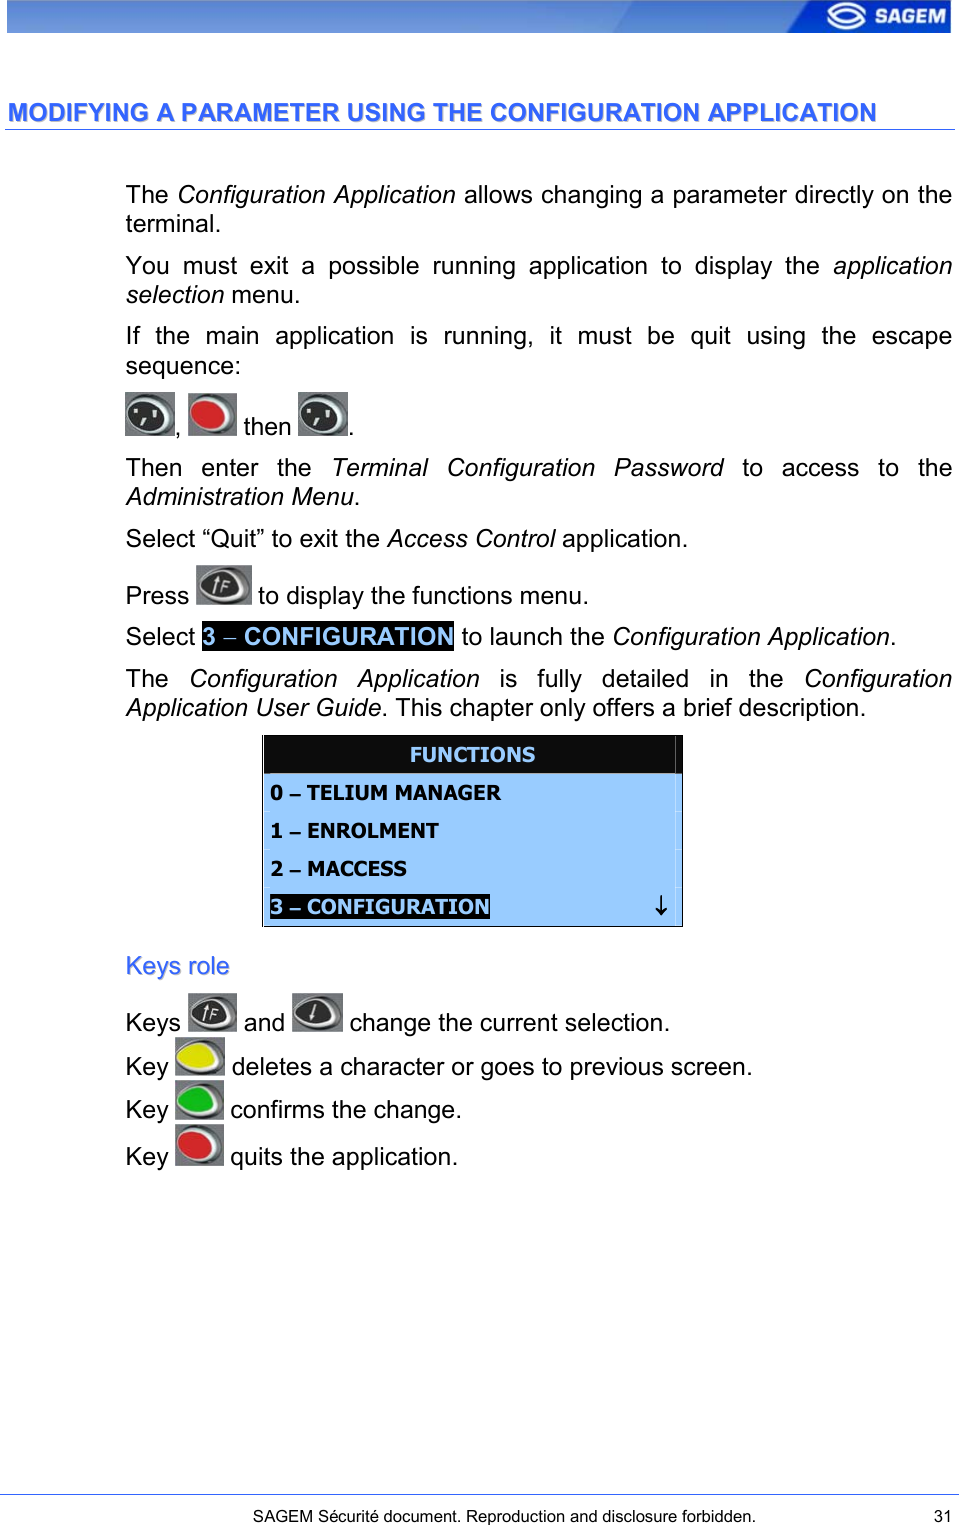    SAGEM Sécurité document. Reproduction and disclosure forbidden.  31  MMOODDIIFFYYIINNGG  AA  PPAARRAAMMEETTEERR  UUSSIINNGG  TTHHEE  CCOONNFFIIGGUURRAATTIIOONN  AAPPPPLLIICCAATTIIOONN  The Configuration Application allows changing a parameter directly on the terminal. You  must  exit  a  possible  running  application  to  display  the  application selection menu. If  the  main  application  is  running,  it  must  be  quit  using  the  escape sequence: ,   then  . Then  enter  the  Terminal  Configuration  Password  to  access  to  the Administration Menu. Select “Quit” to exit the Access Control application. Press   to display the functions menu. Select 3 − CONFIGURATION to launch the Configuration Application. The  Configuration  Application  is  fully  detailed  in  the  Configuration Application User Guide. This chapter only offers a brief description. FUNCTIONS 0 −−−− TELIUM MANAGER 1 −−−− ENROLMENT  2 −−−− MACCESS 3 −−−− CONFIGURATION                           ↓↓↓↓ KKeeyyss  rroollee  Keys   and   change the current selection. Key   deletes a character or goes to previous screen. Key   confirms the change. Key   quits the application. 